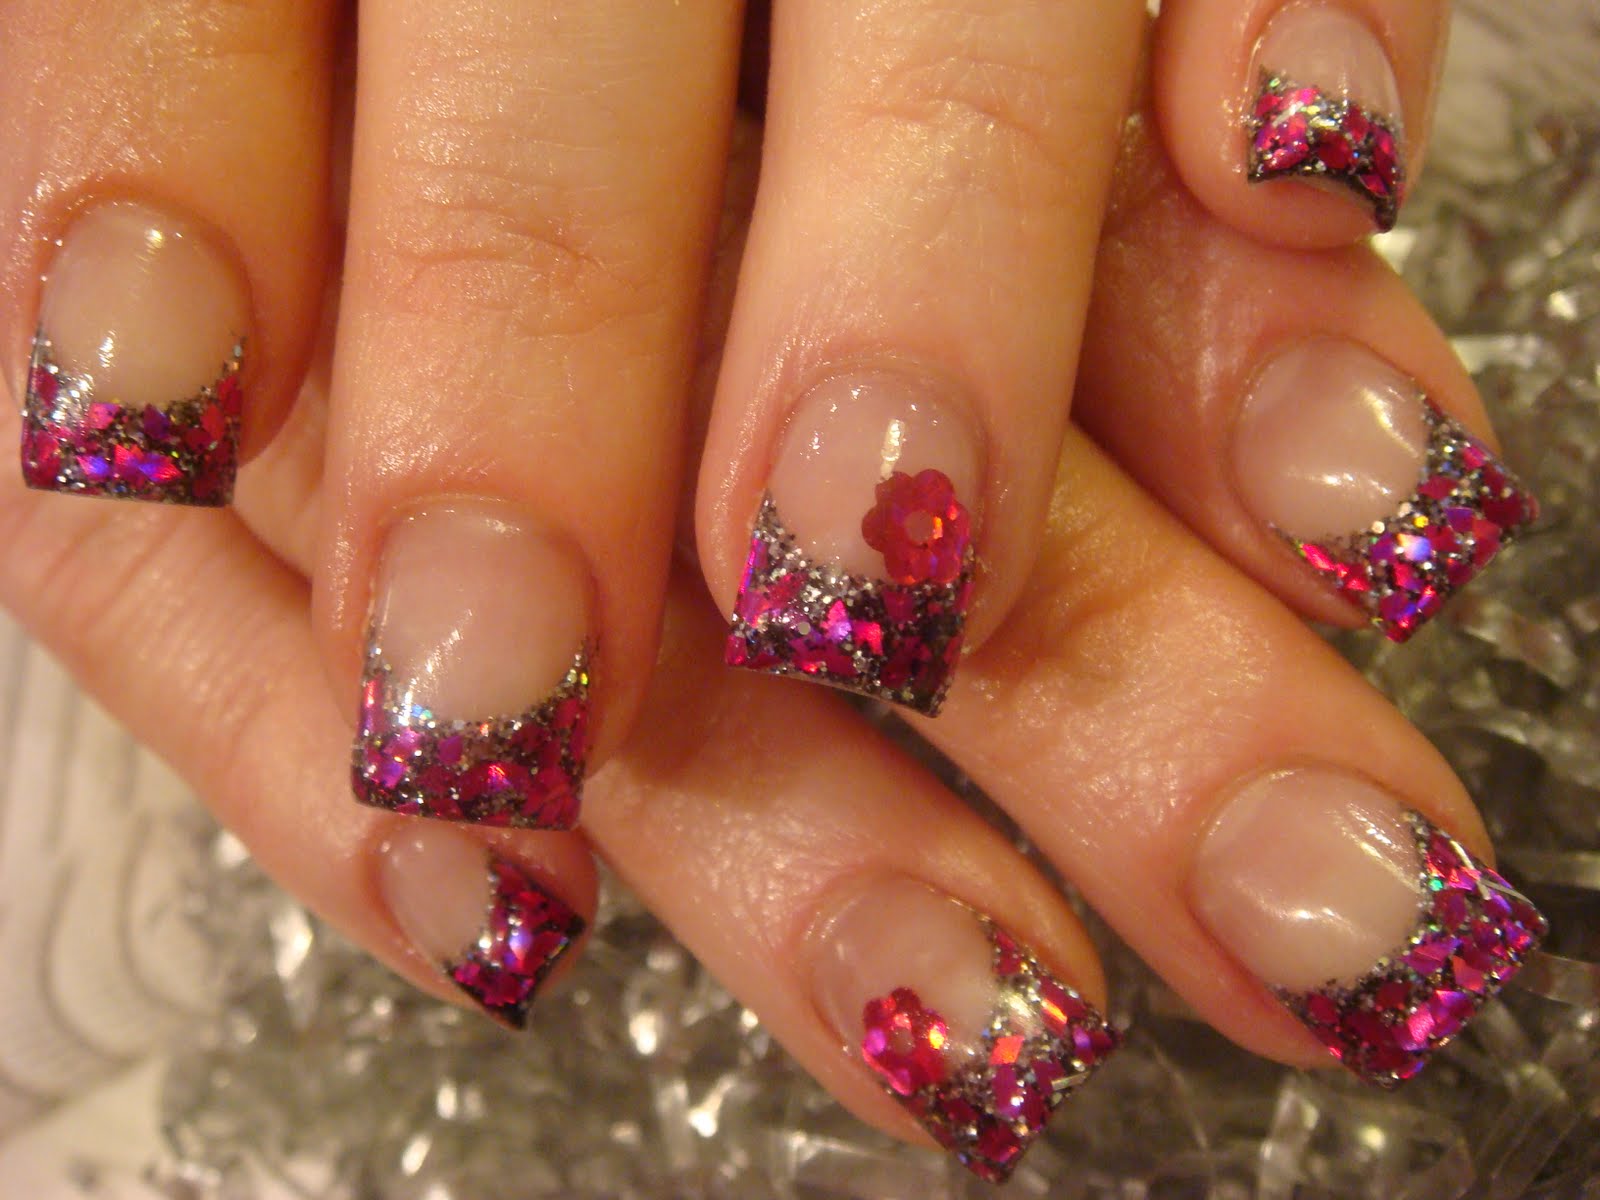 6. Creative Nails - wide 7